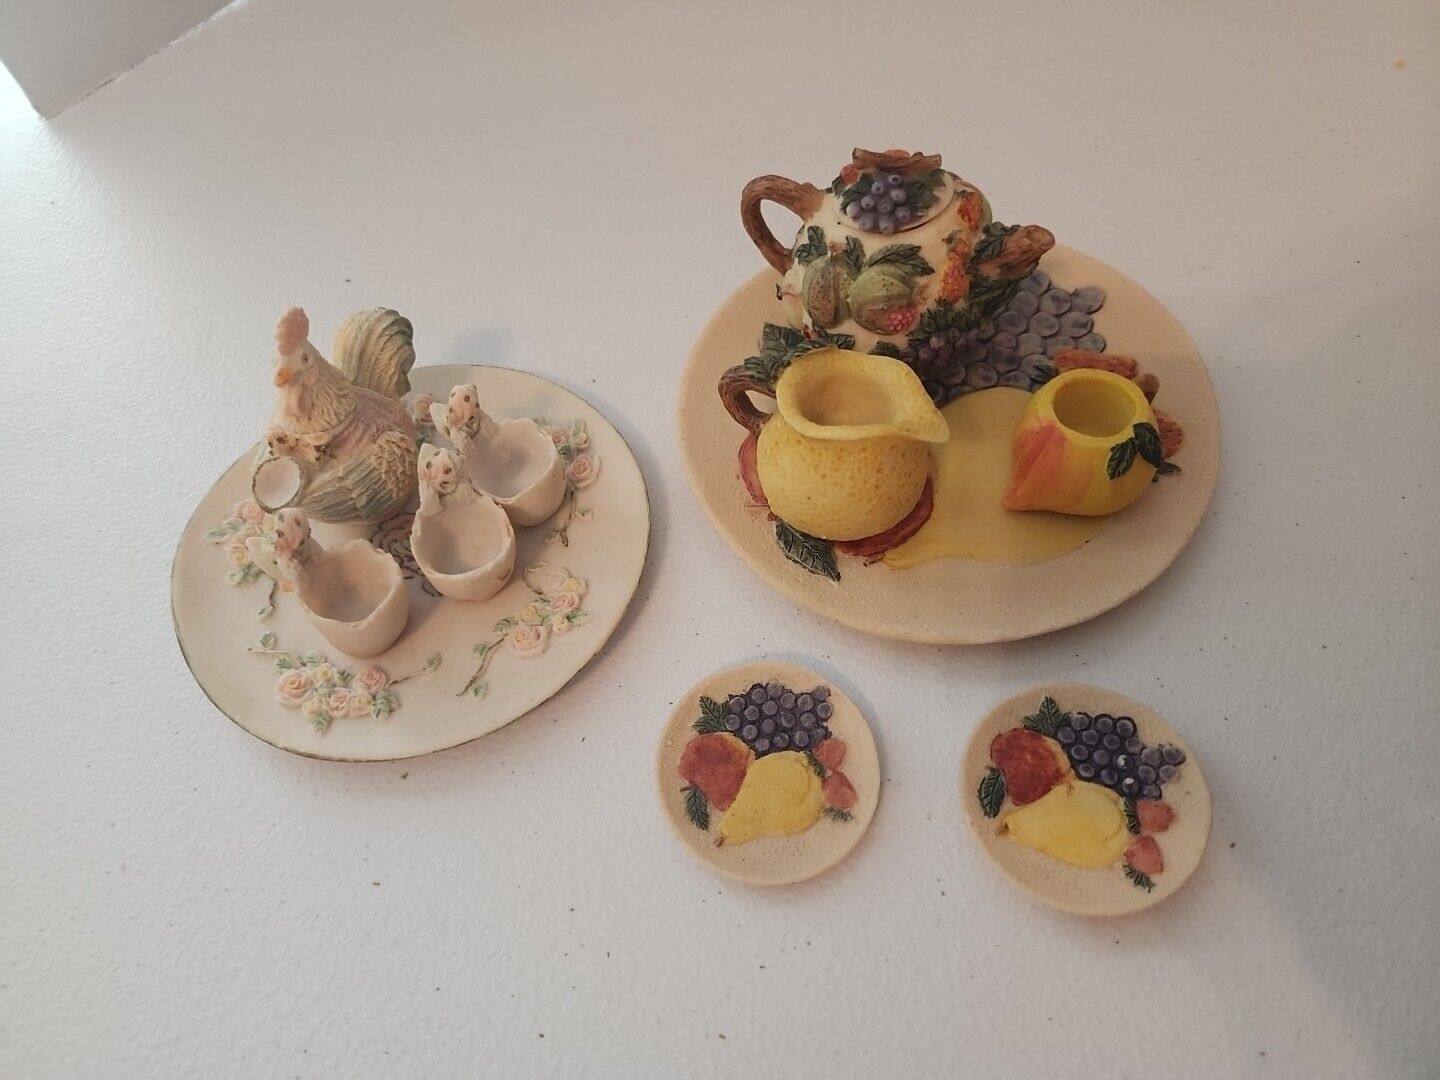 2 Miniature Tea Party Sets. Vintage~1995 Resin Colorful Fruit & Rooster 13pc